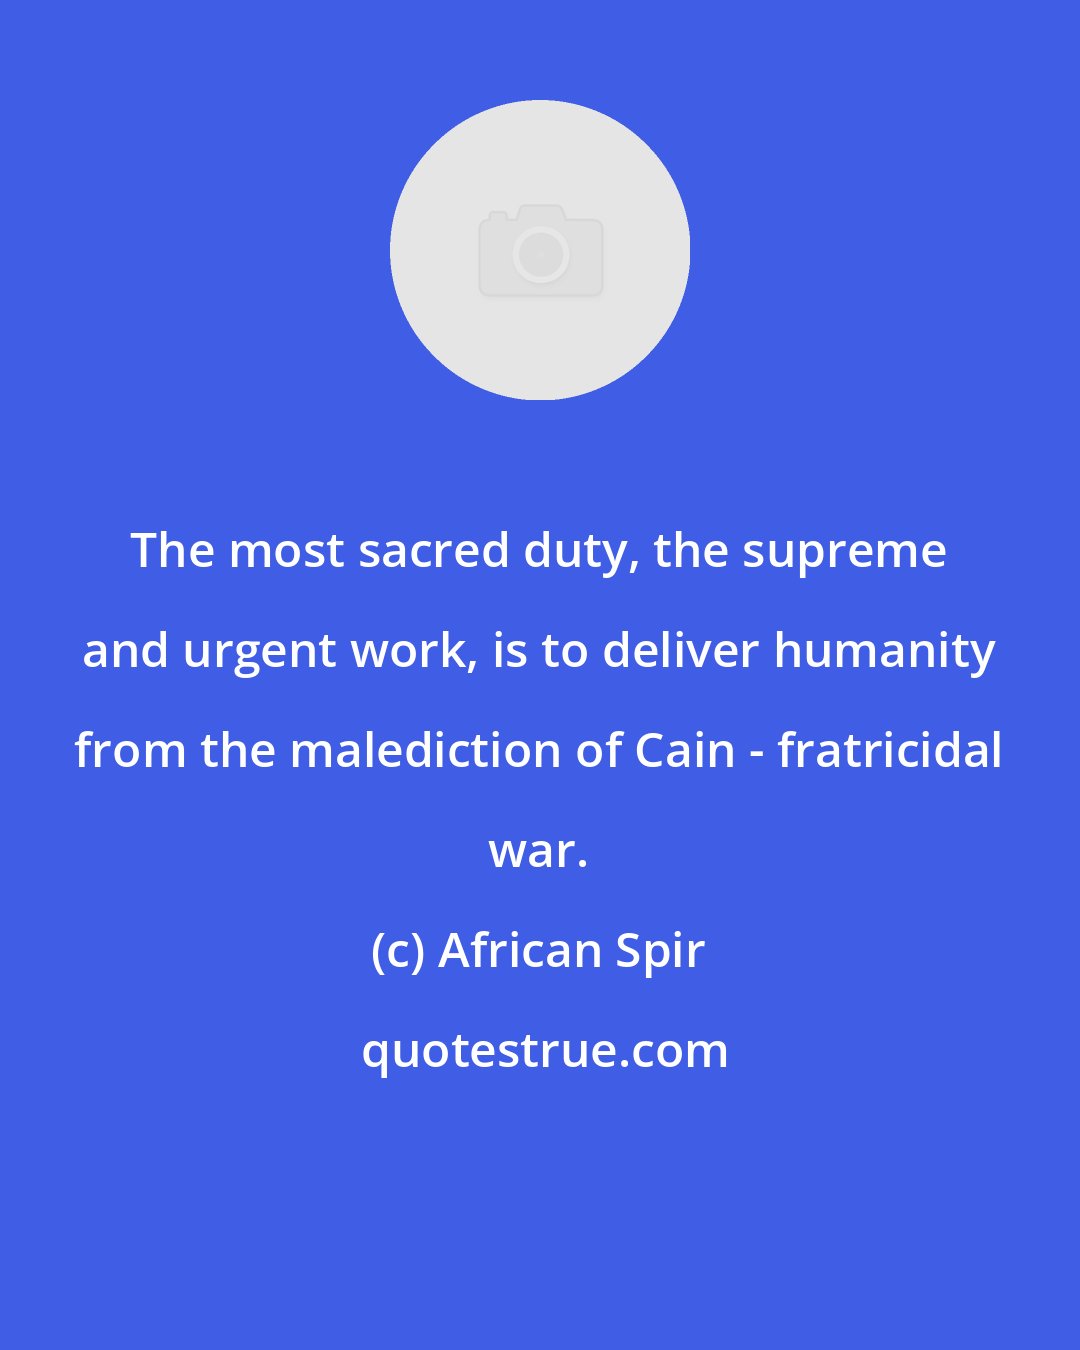 African Spir: The most sacred duty, the supreme and urgent work, is to deliver humanity from the malediction of Cain - fratricidal war.